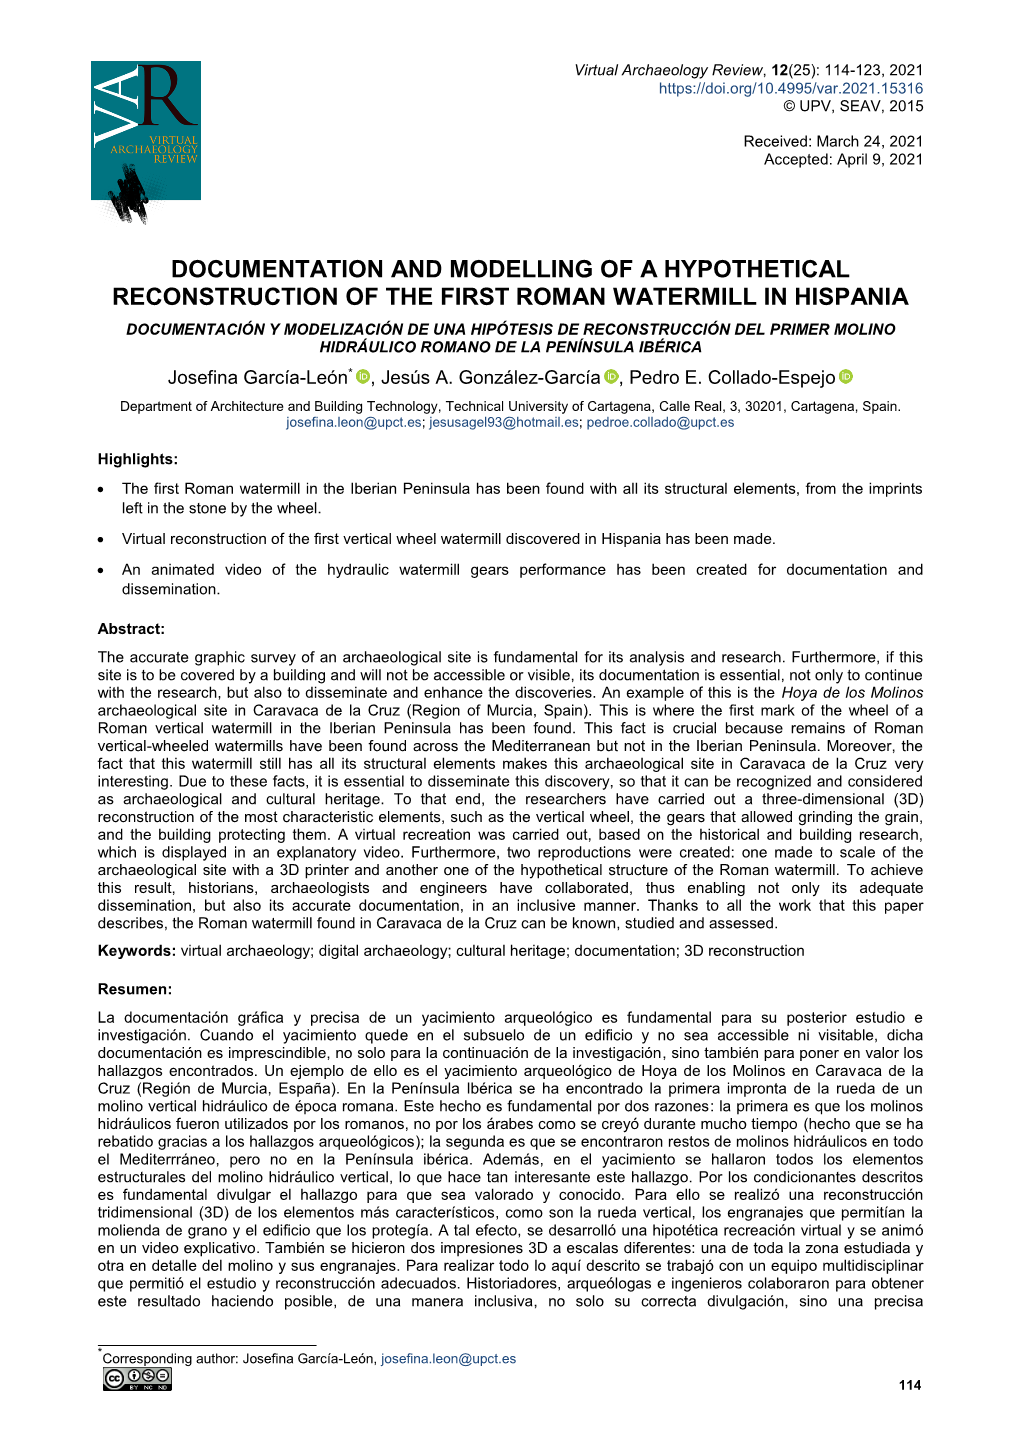 Documentation and Modelling of a Hypothetical